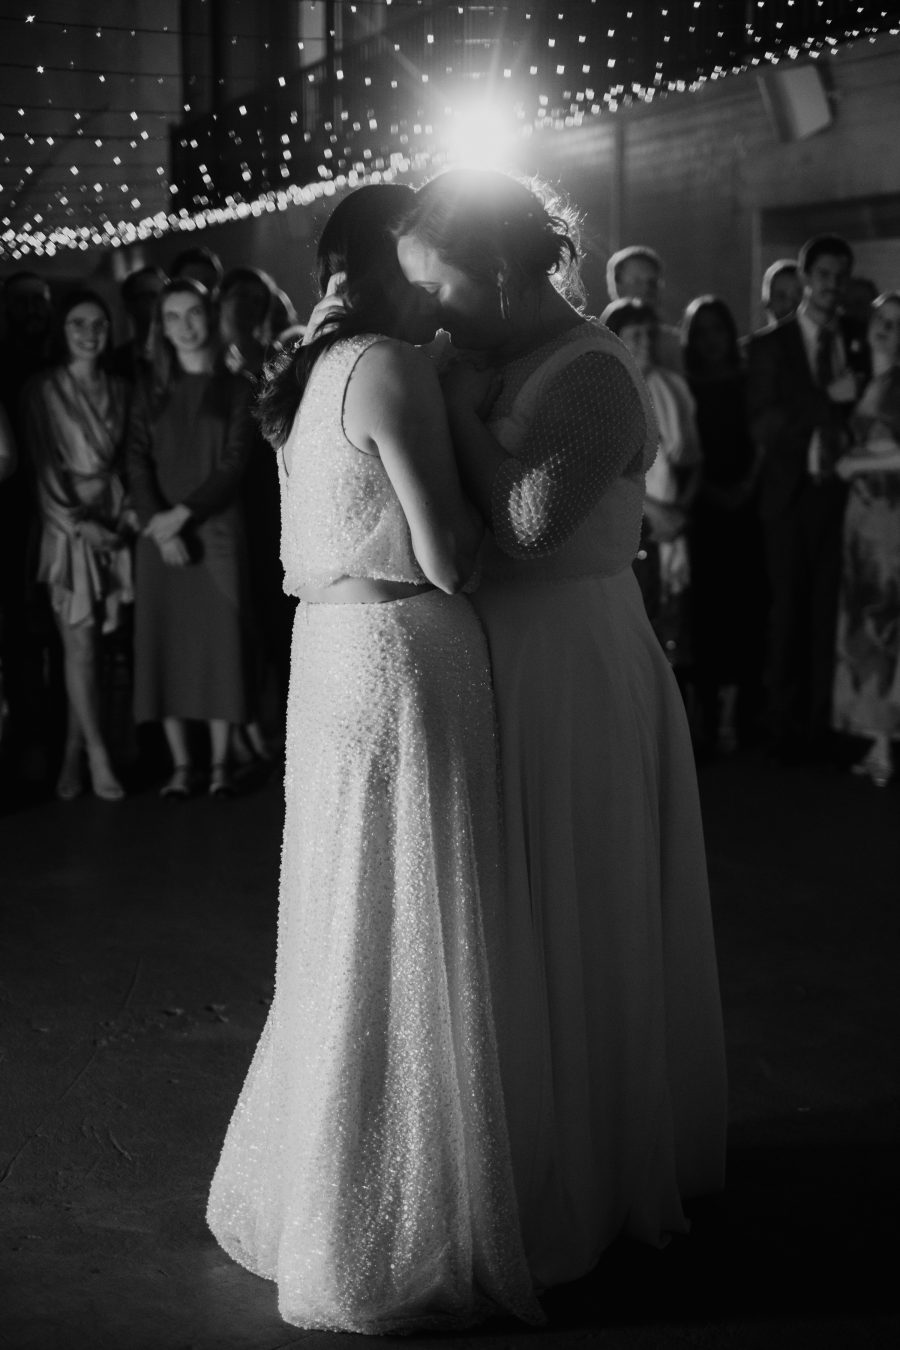 A queer couple dancing on their wedding day.